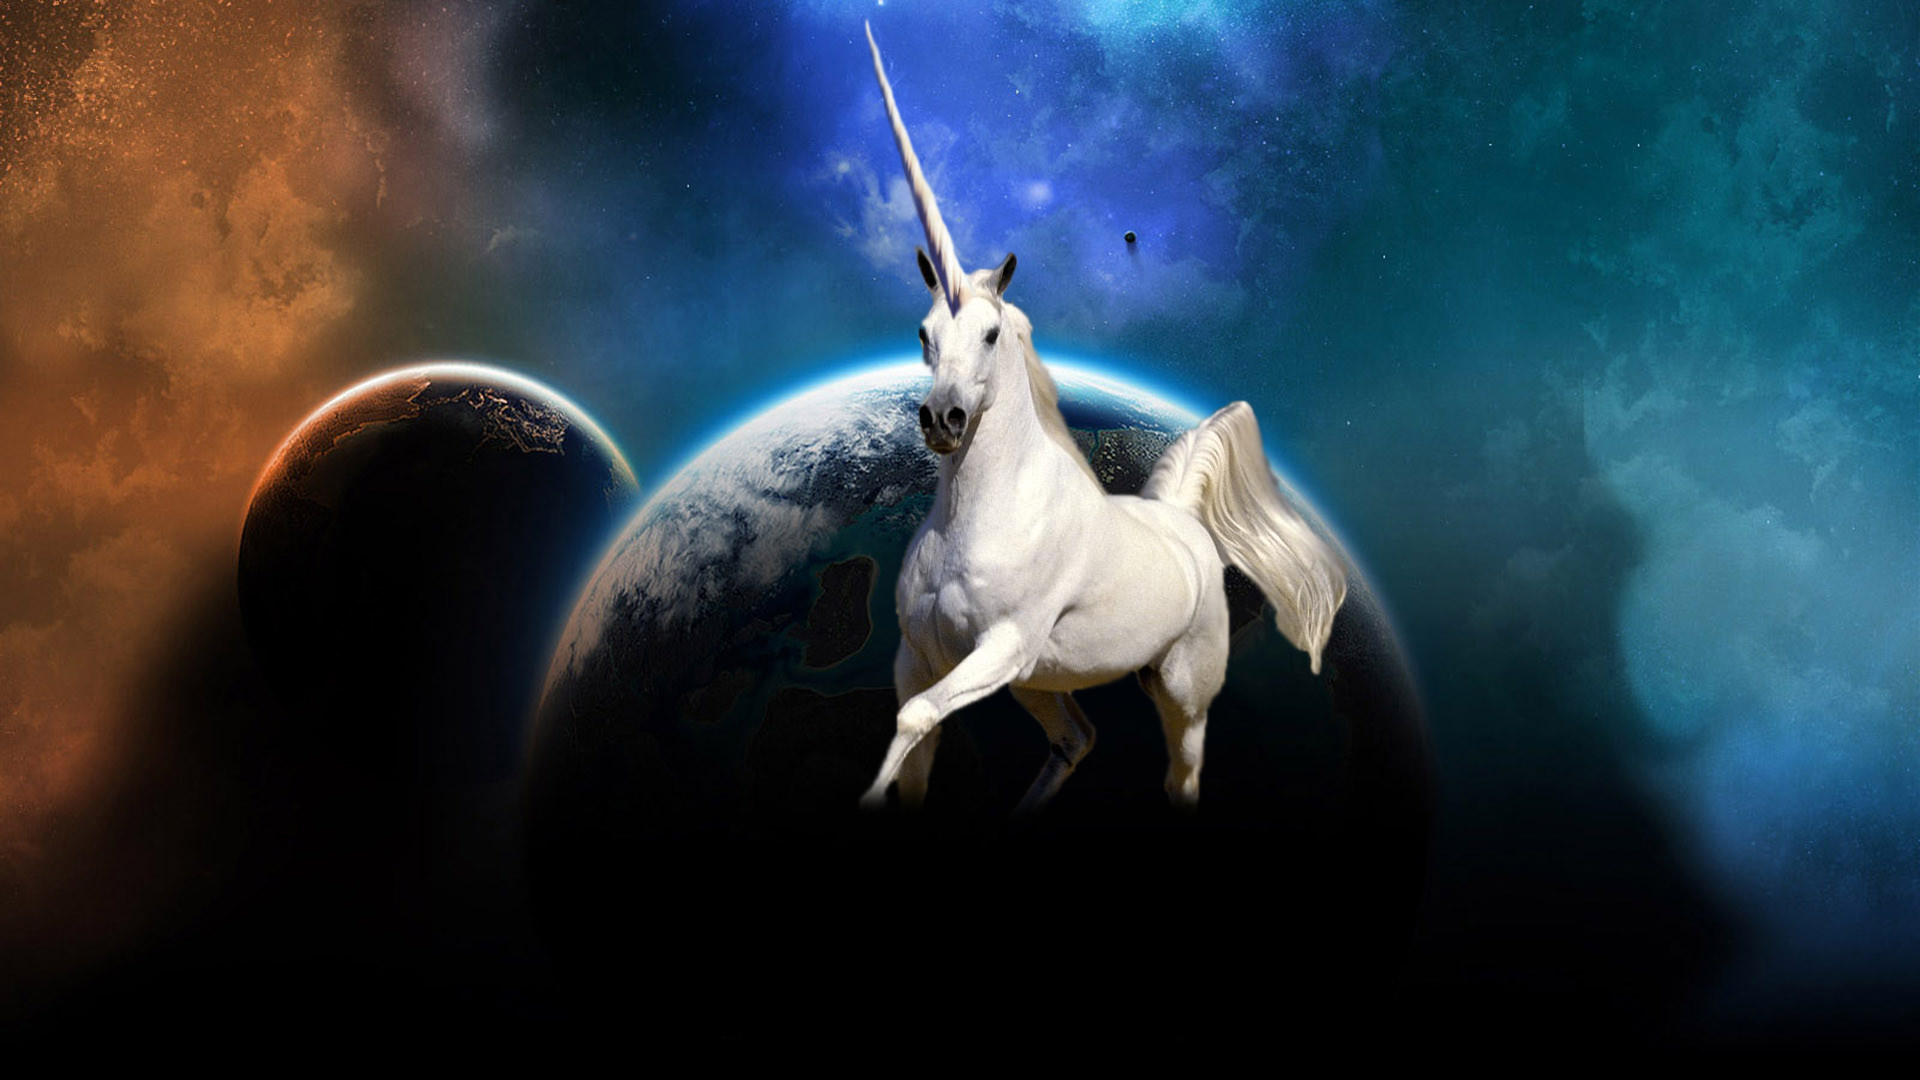 1920x1080 Awesome Unicorn HD Wallpapers.